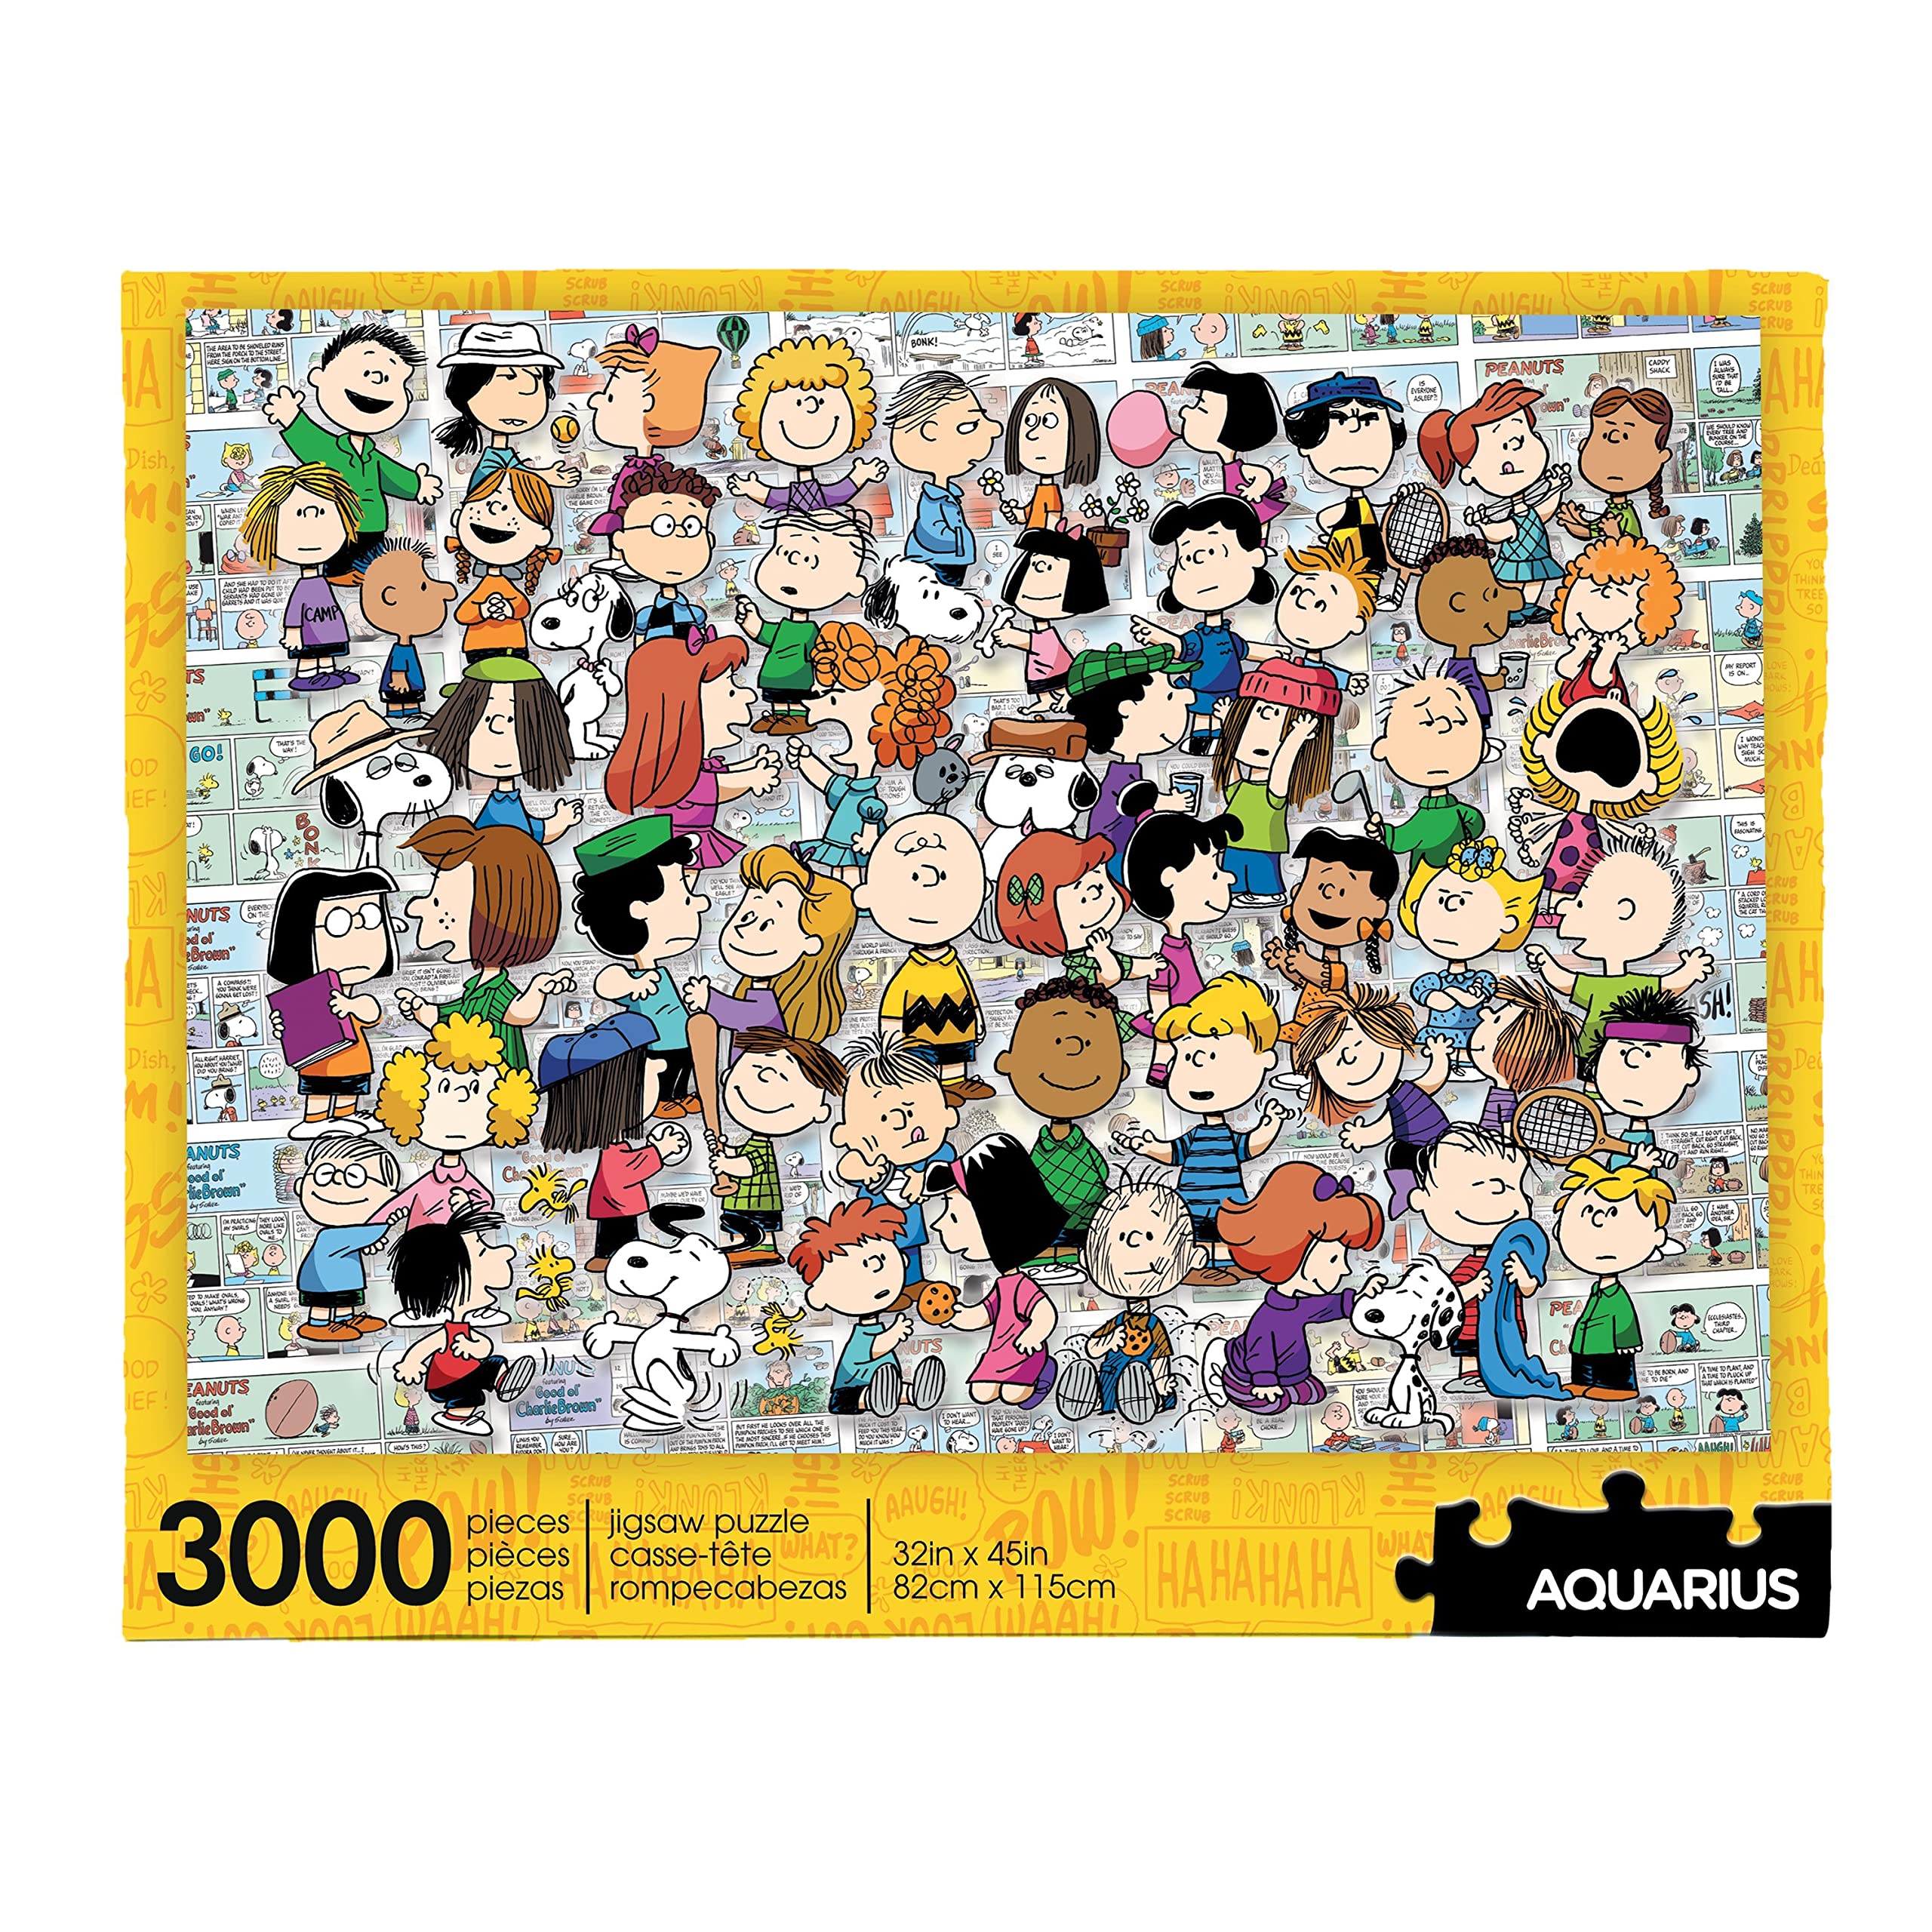 AQUARIUS Peanuts Cast Puzzle (3000 Piece Jigsaw Puzzle) - Officially Licensed Peanuts Merchandise & Collectibles - Glare Free - Precision Fit - Virtually No Puzzle Dust - 32 x 45 Inches